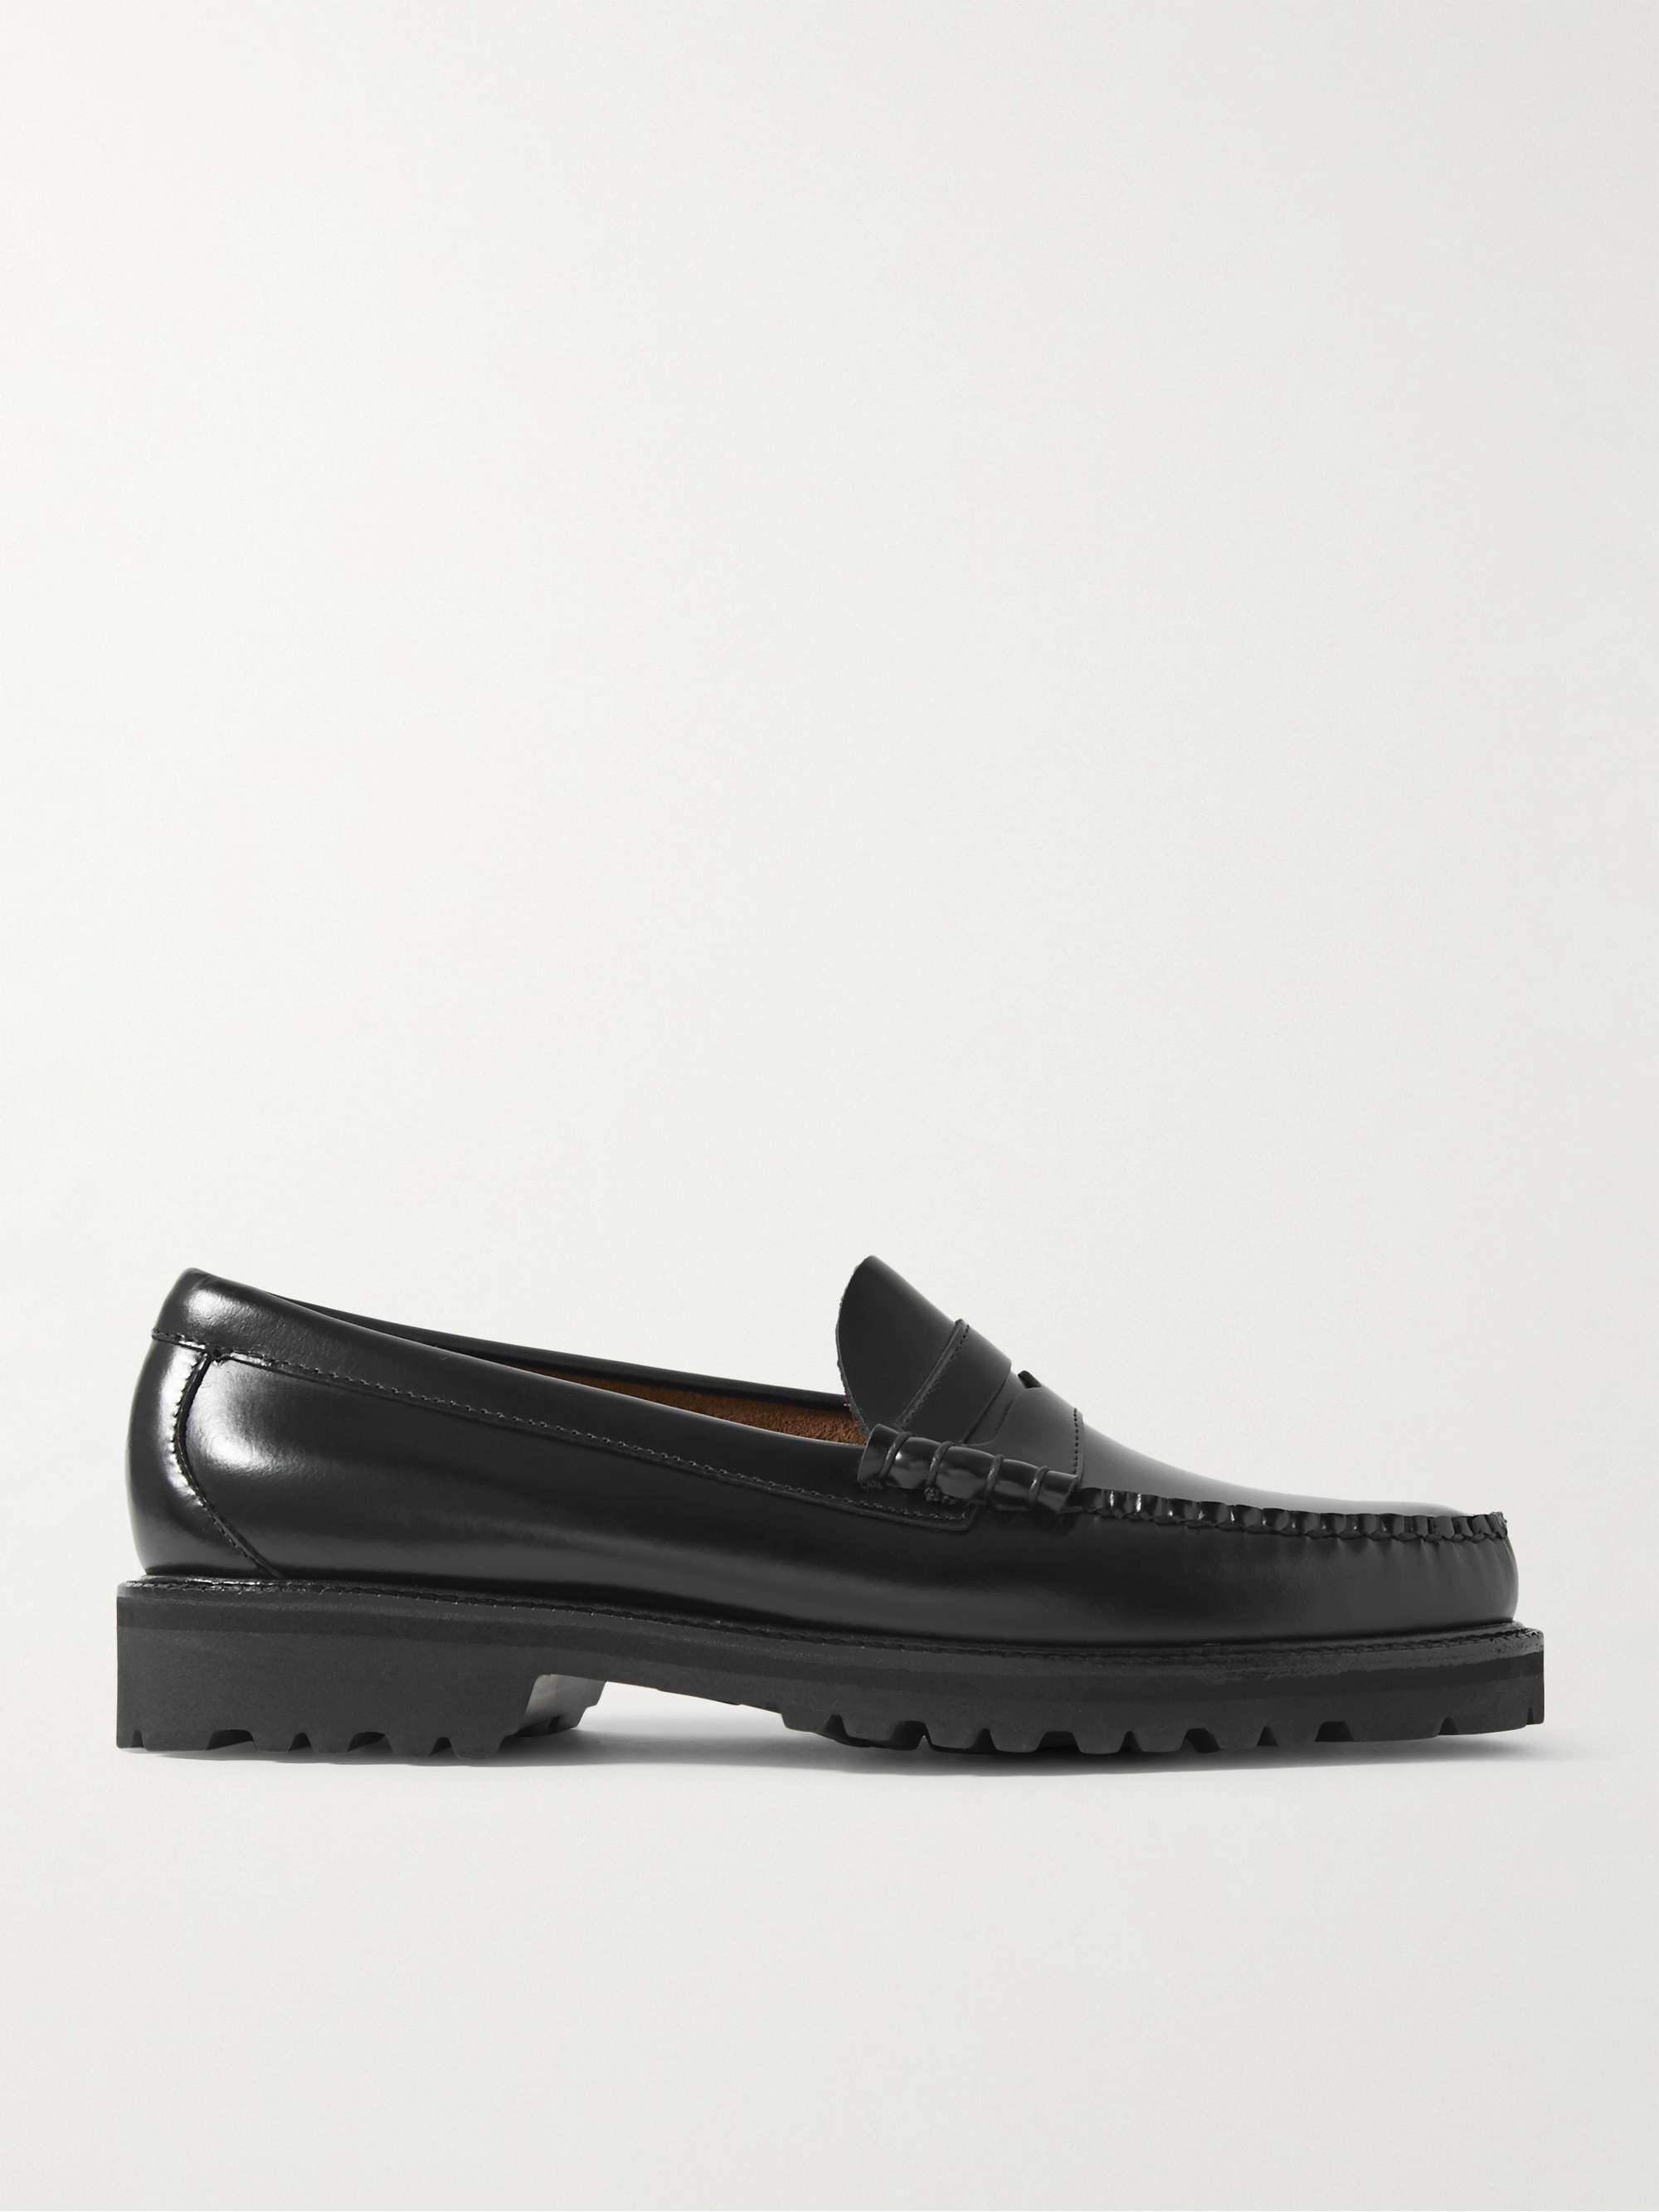 G.H. BASS & CO. Weejuns 90 Larson Leather Penny Loafers for Men | MR PORTER